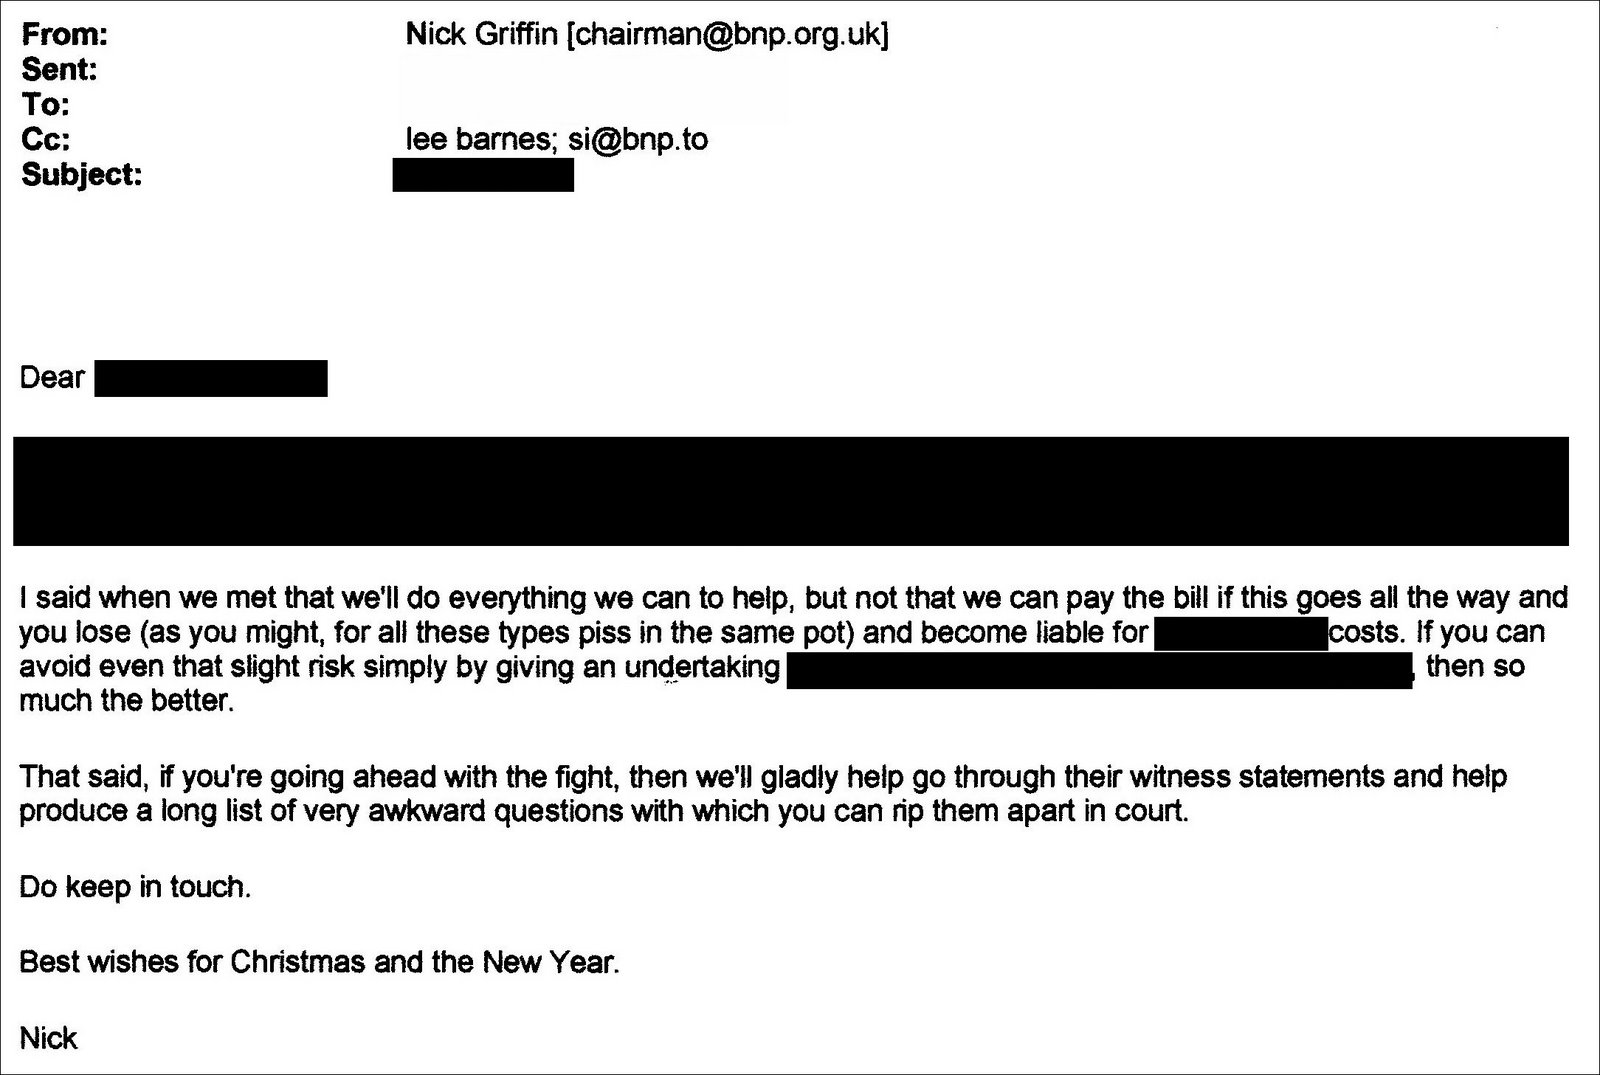 [email+from+nick+griffin+'piss+in+the+same+pot'+24.12.07.jpg]